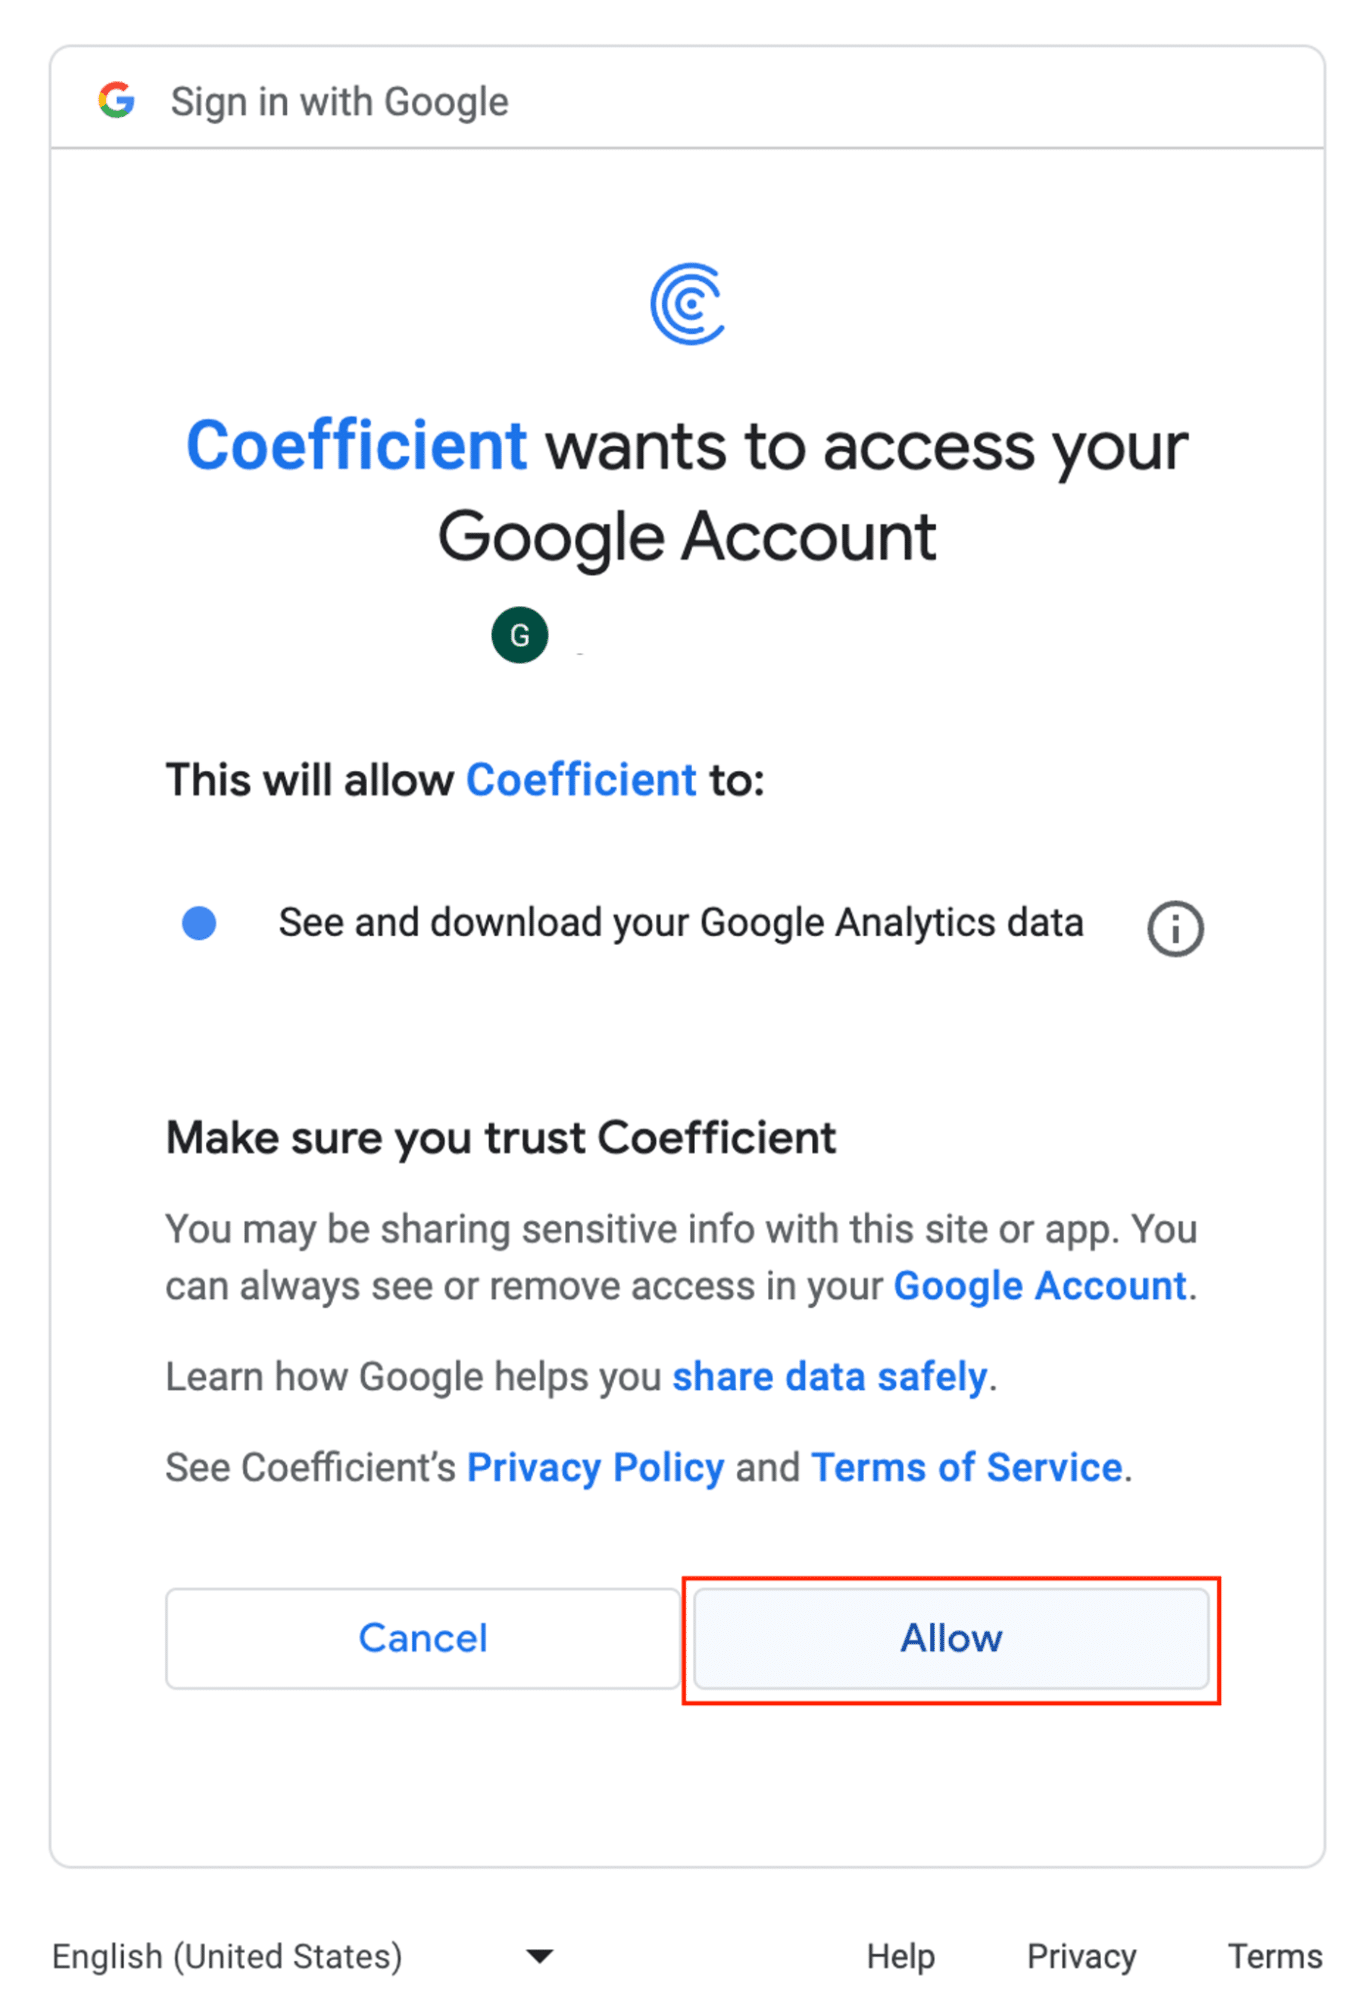 Visual of the 'Allow' button clicked to finalize the Coefficient authorization with Google Ads.